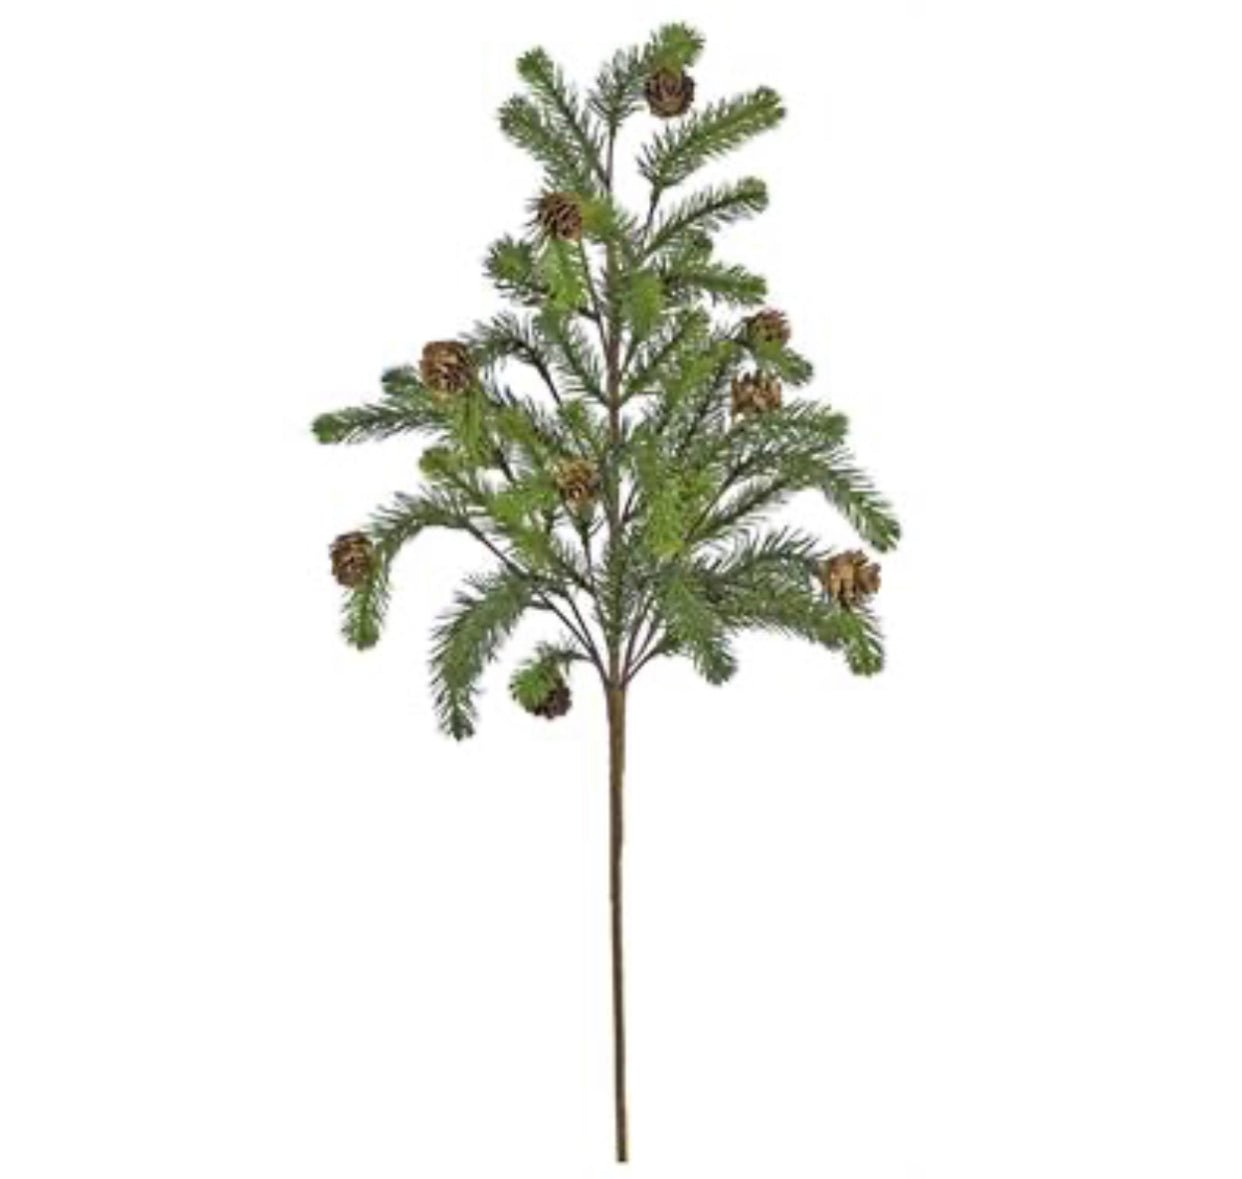 Soft touch noble fir pine spray with cones 28” - Greenery MarketXp2362